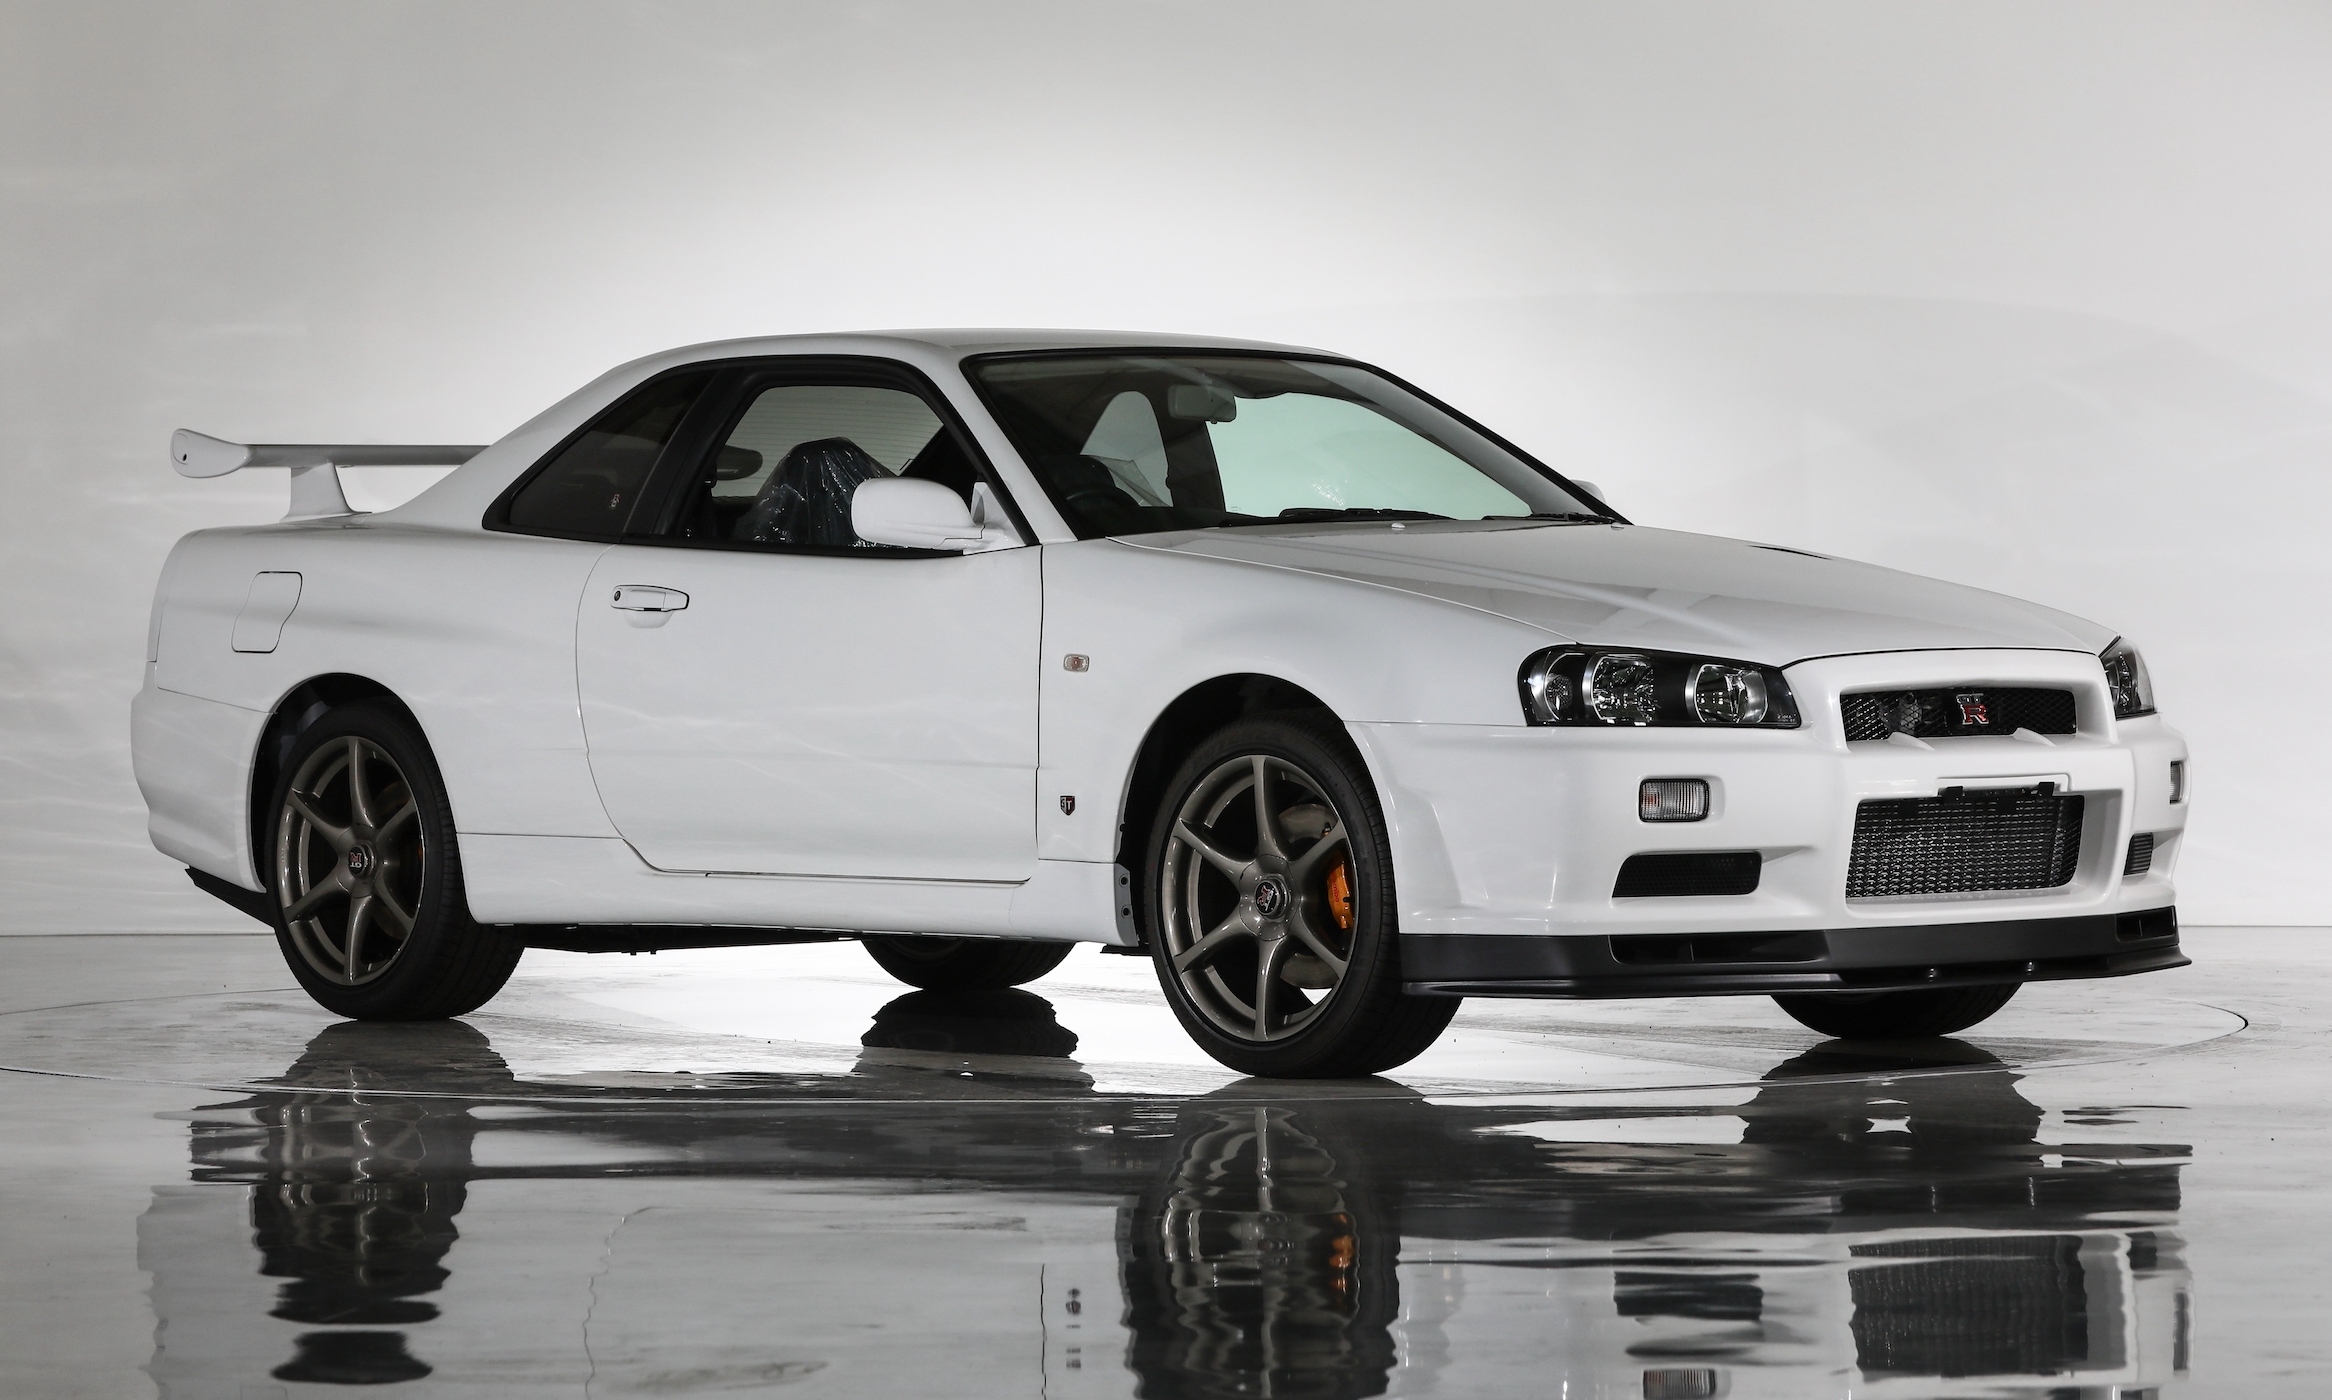 Six-mile Nissan Skyline GT-R R34 sells for a record £400,000